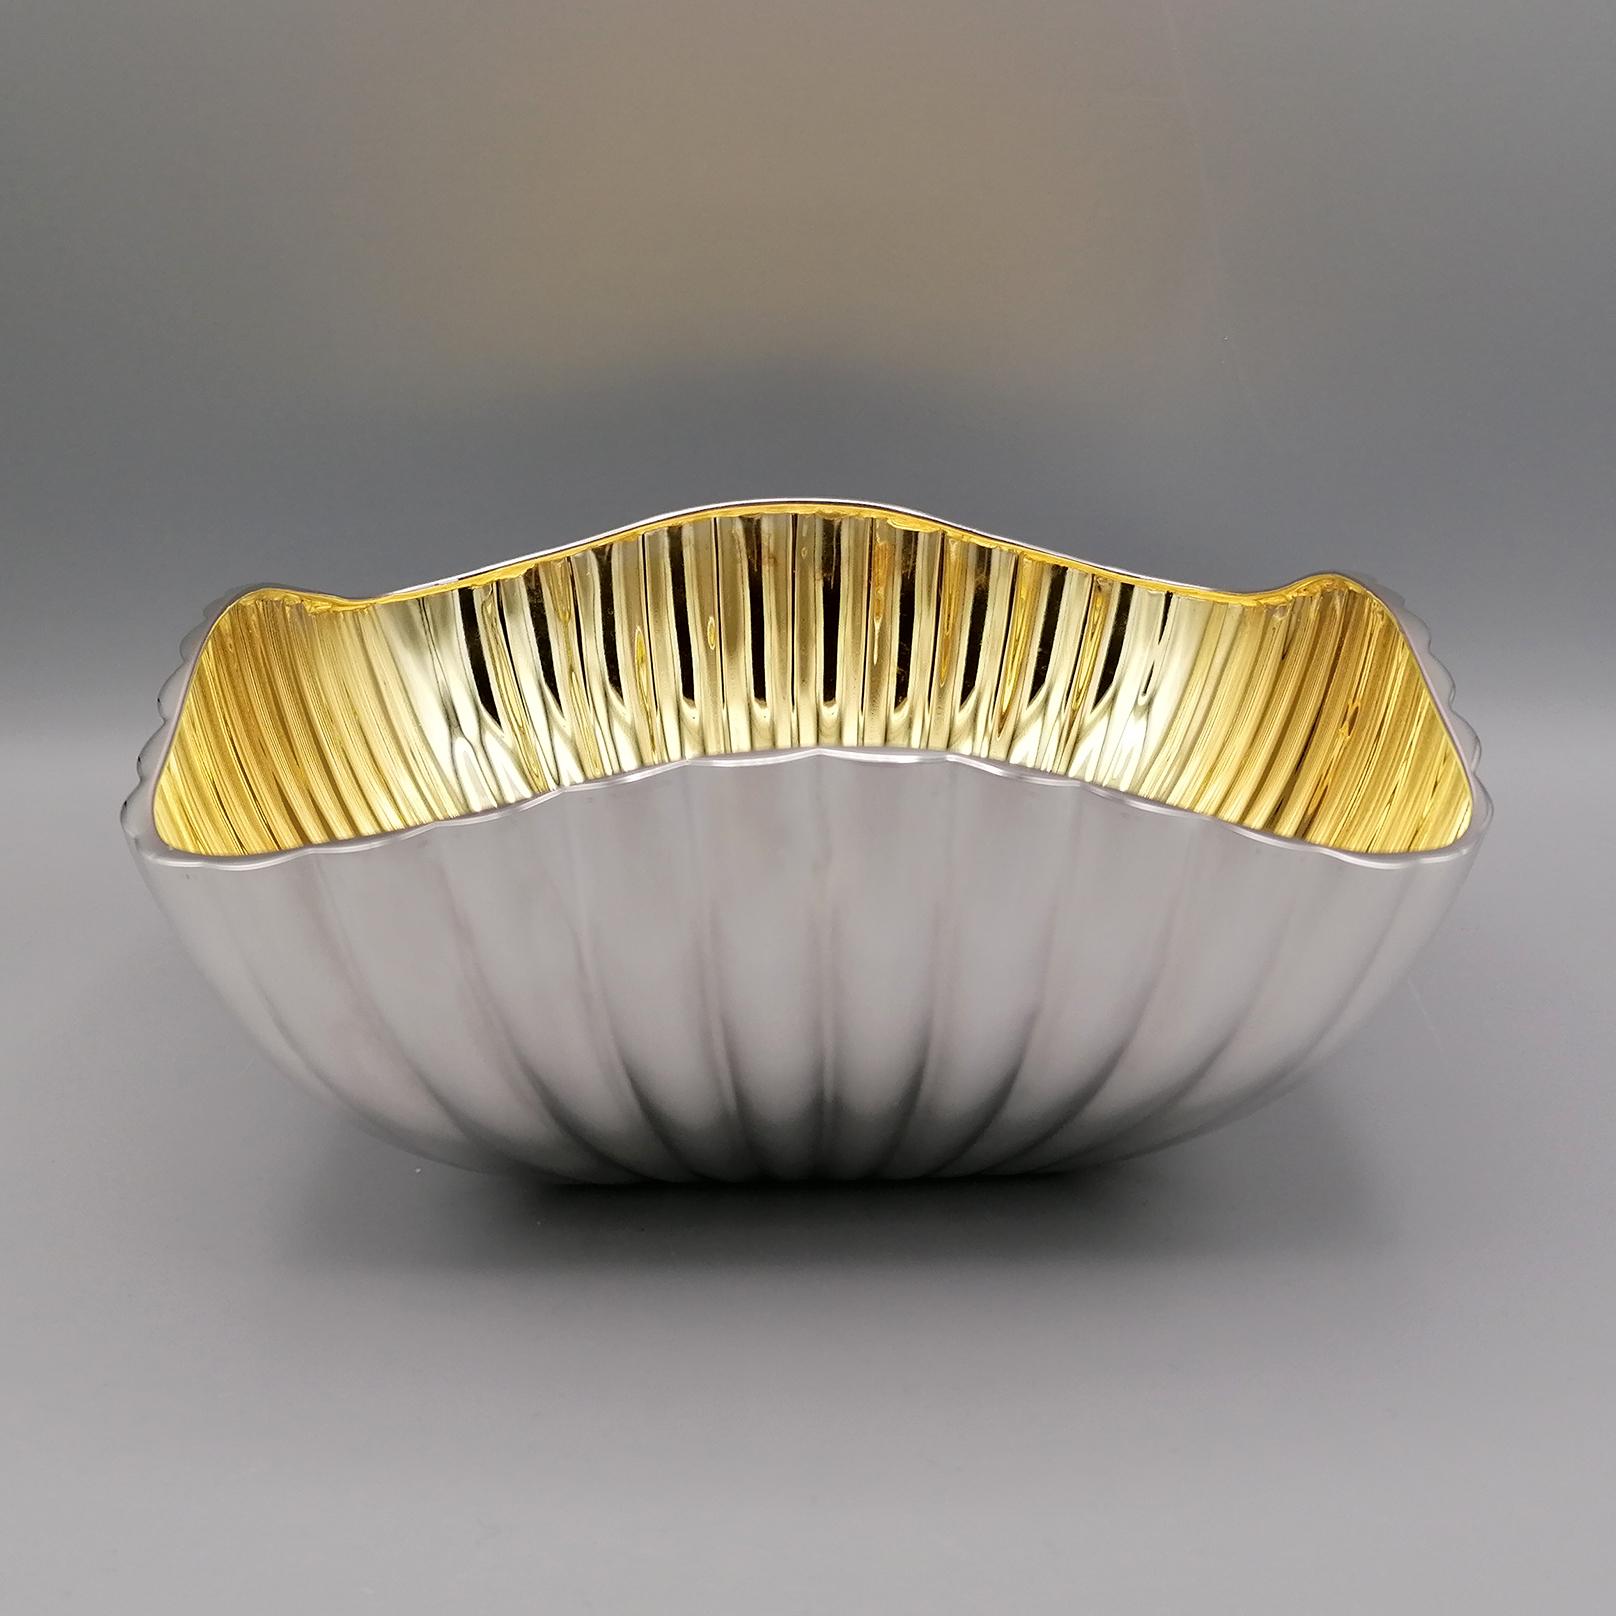 Solid silver bowl completely handmade, shaped and square with cannetè design made with the embossed and chisel technique. 
The bowl was thickly gilded with 24Kt gold only on the inside, while the outside remained natural silver. 

By Pria & Sari